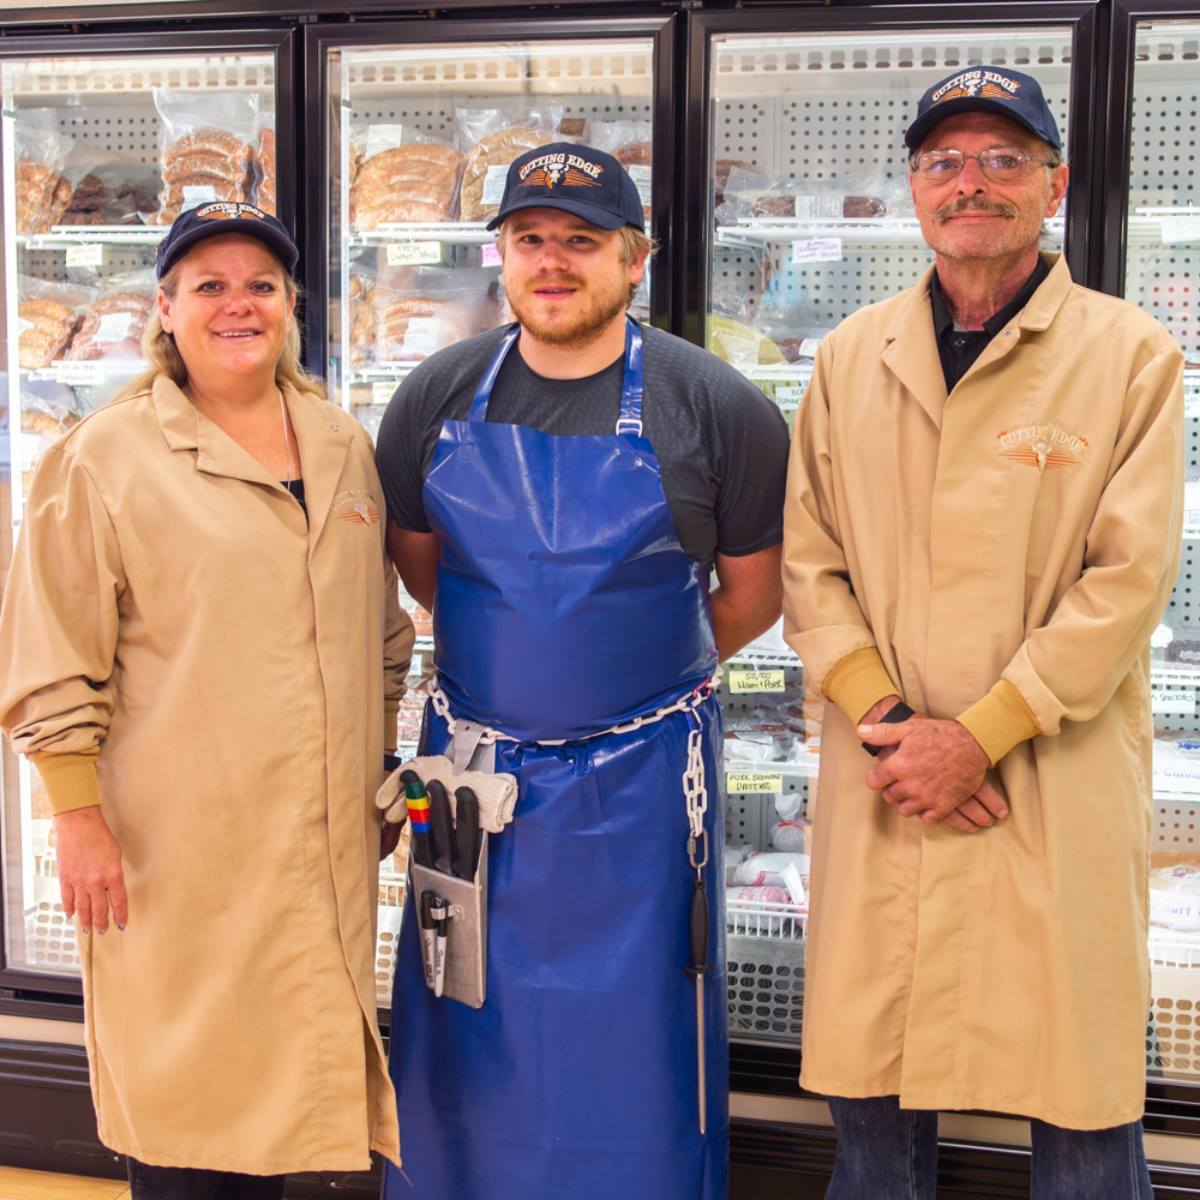 this is us! - Best of the Black Hills Cutting Edge Meats